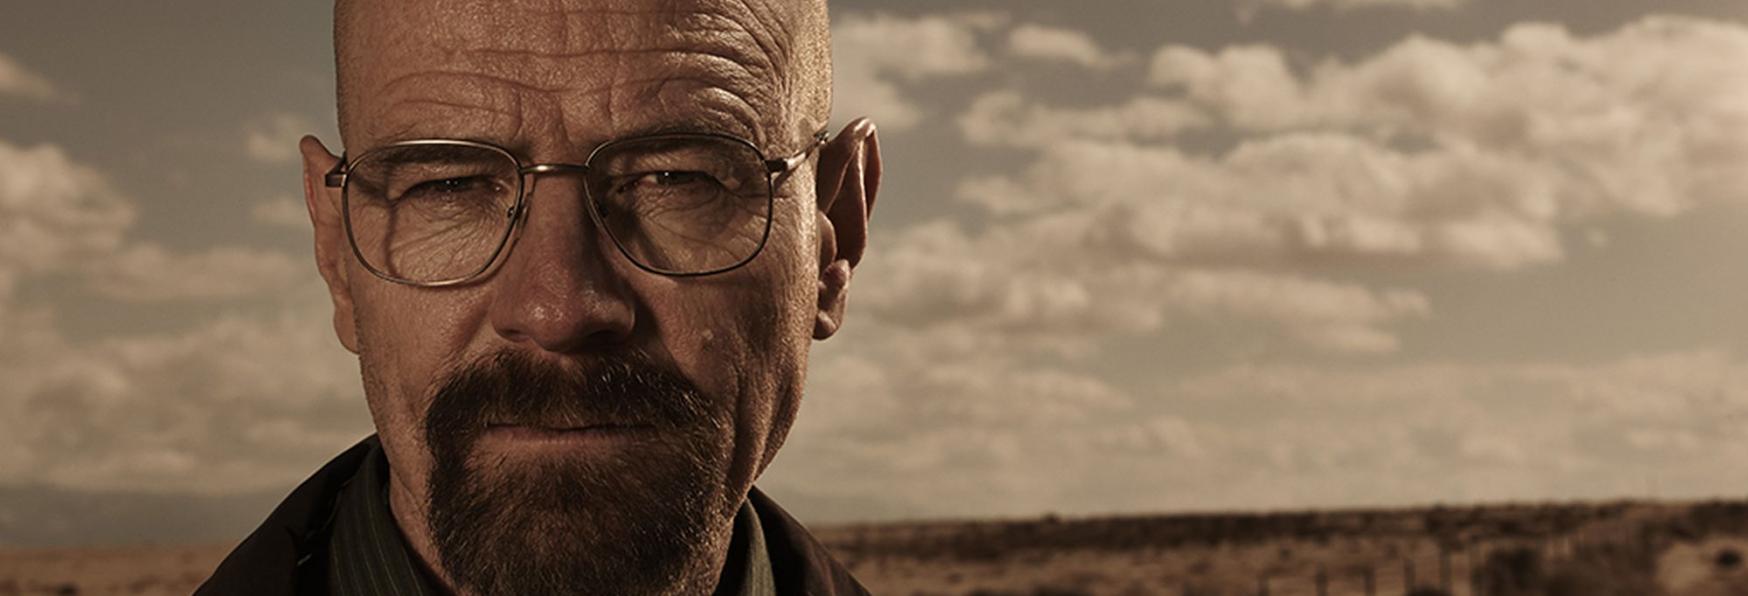 After the Rumors, Bryan Cranston sets things straight: "No, I will not retire"